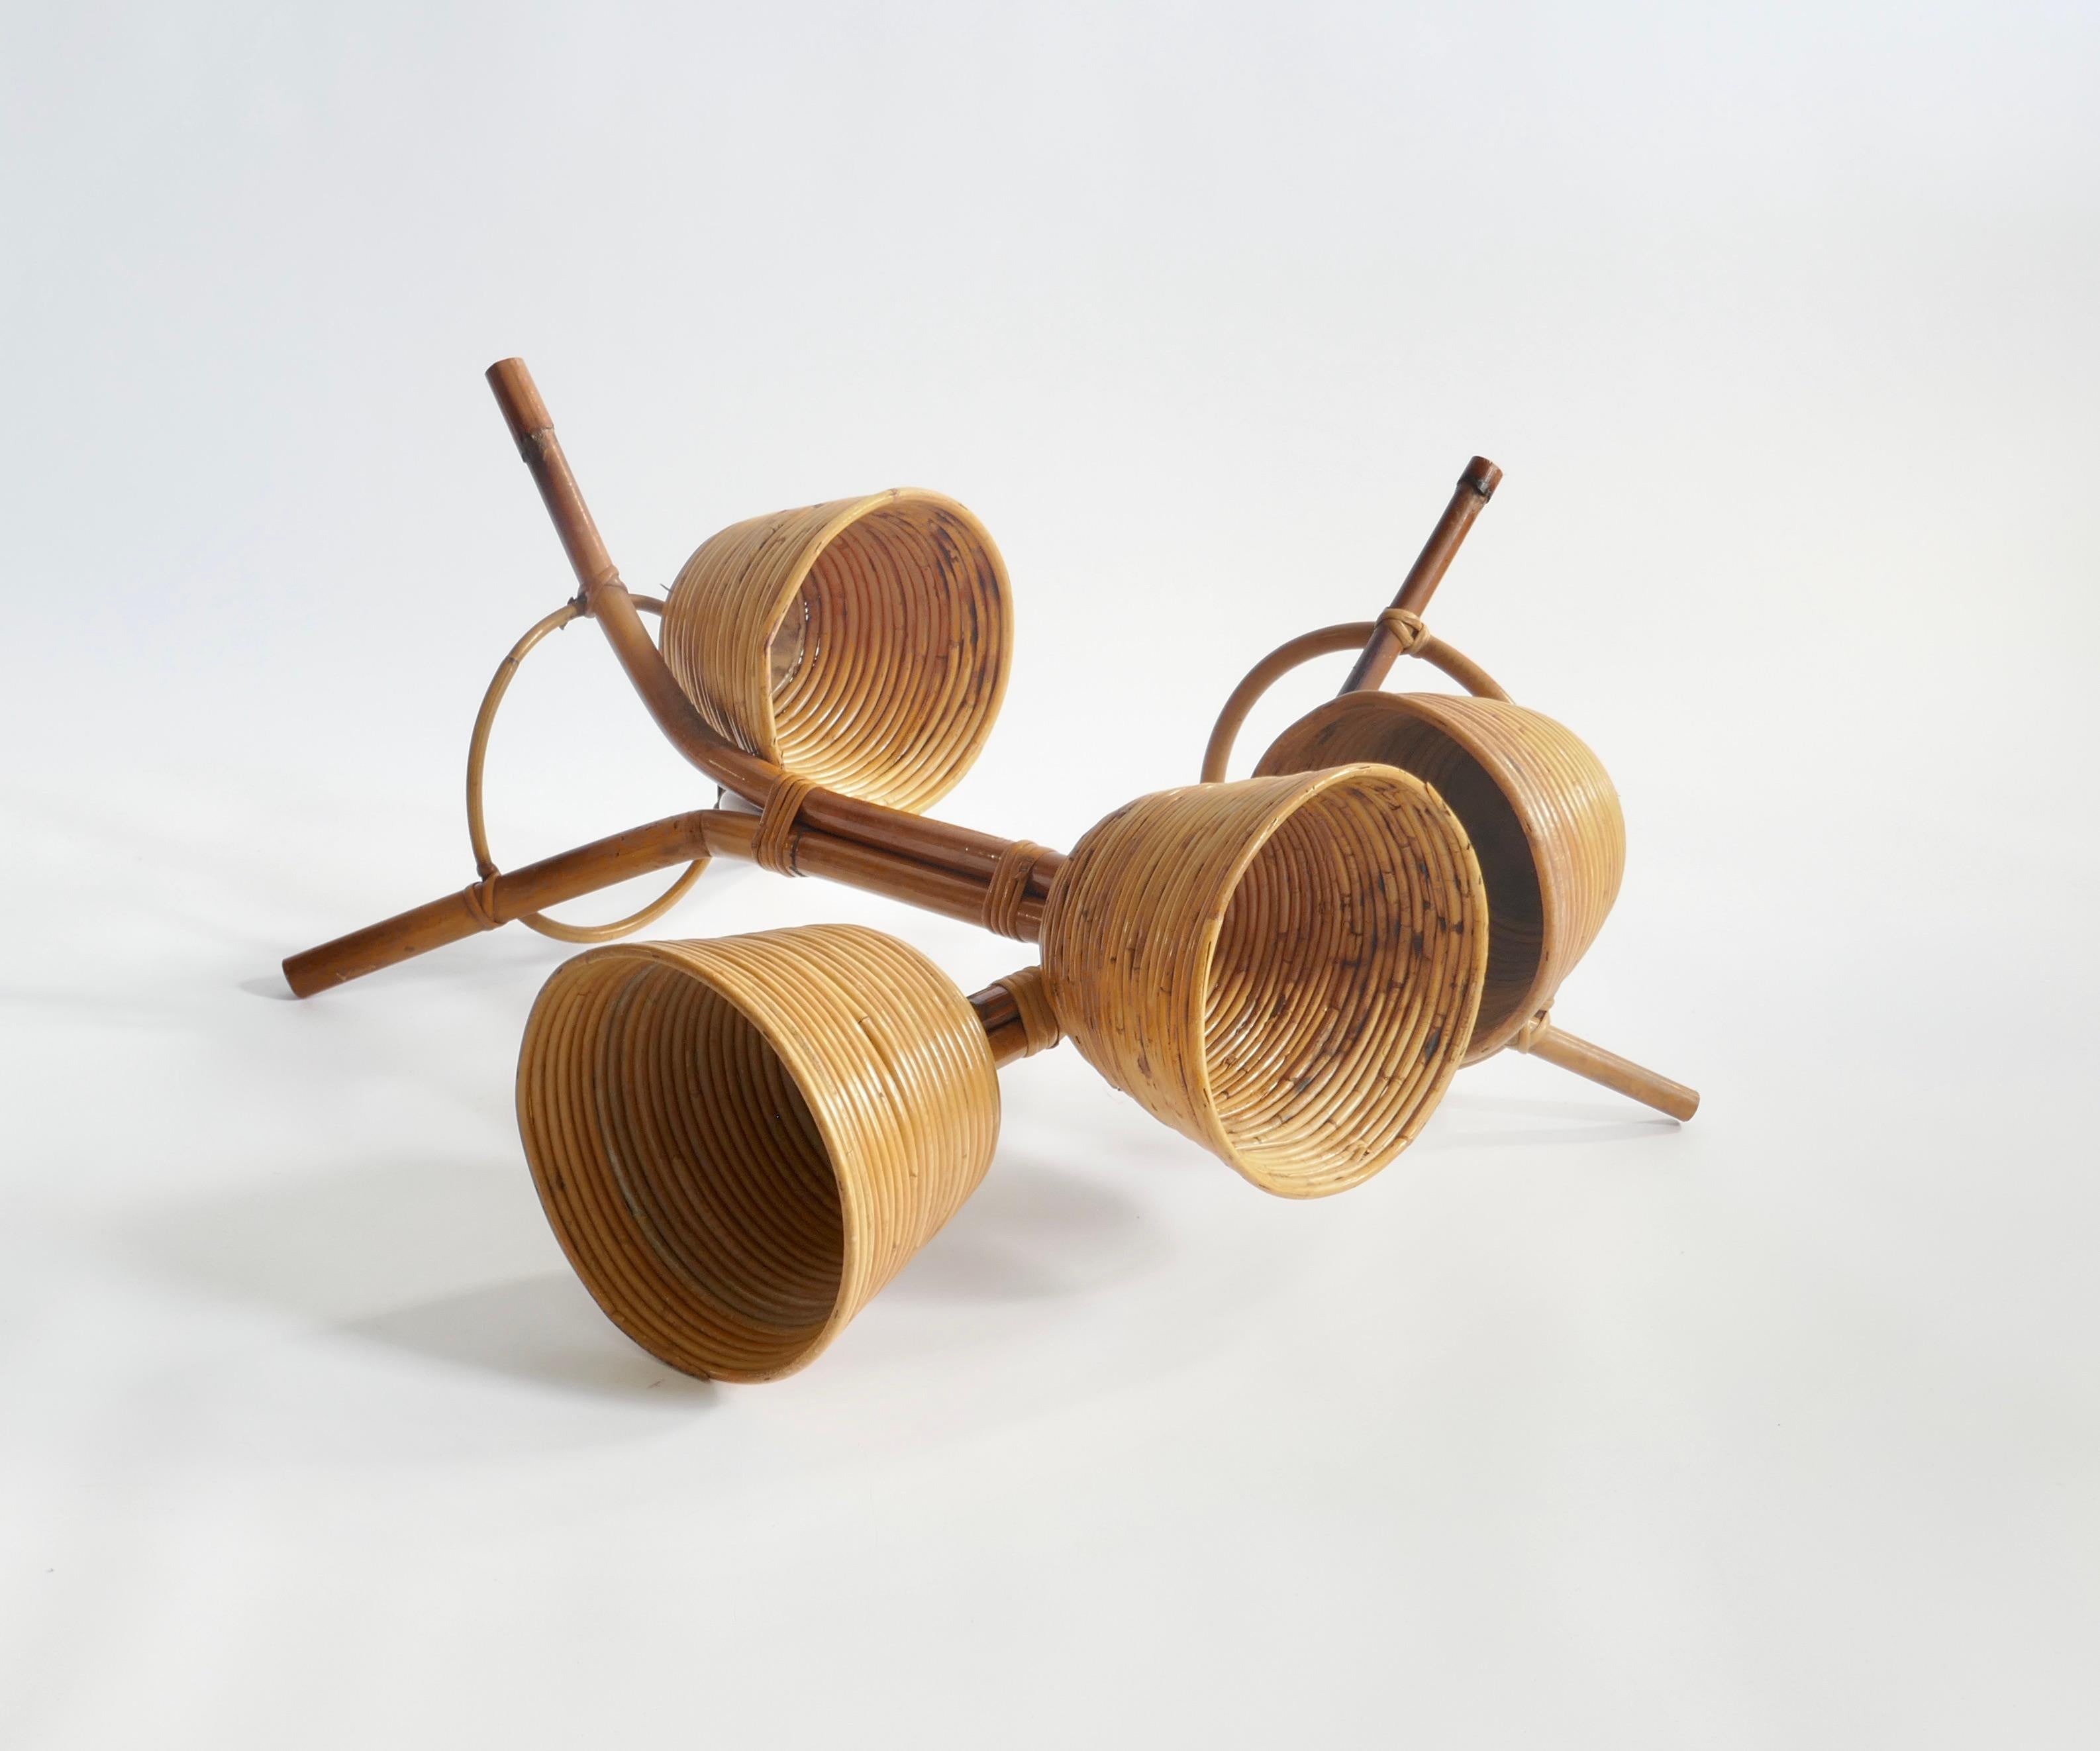 Set of 2 Bamboo and Rattan Plant Holders, Italy 1950s For Sale 2